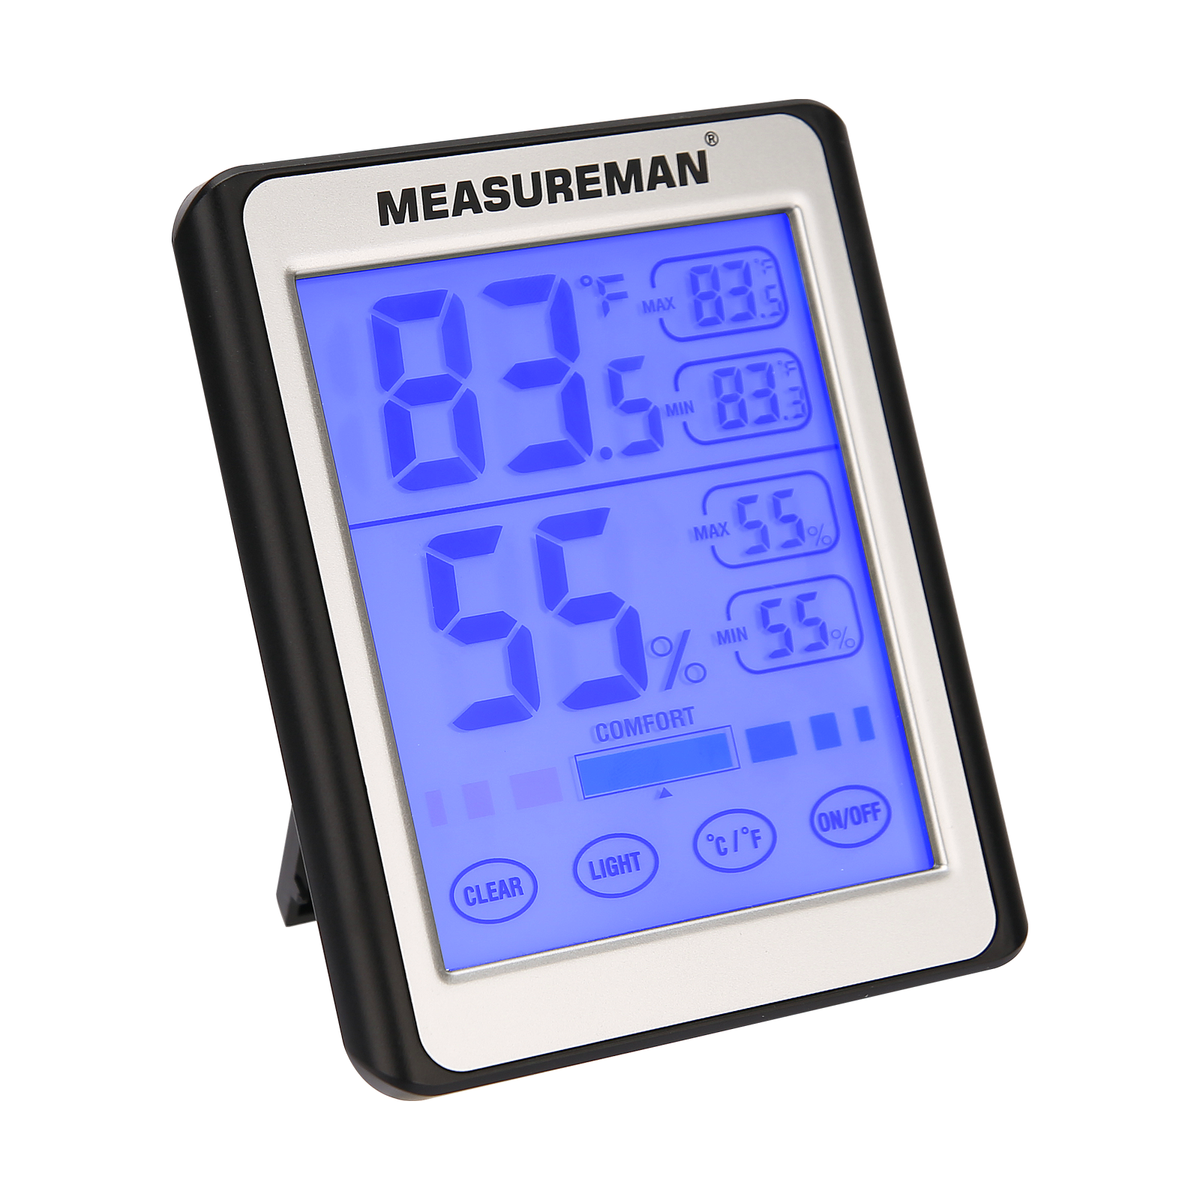 How to Choose a Greenhouse Thermometer